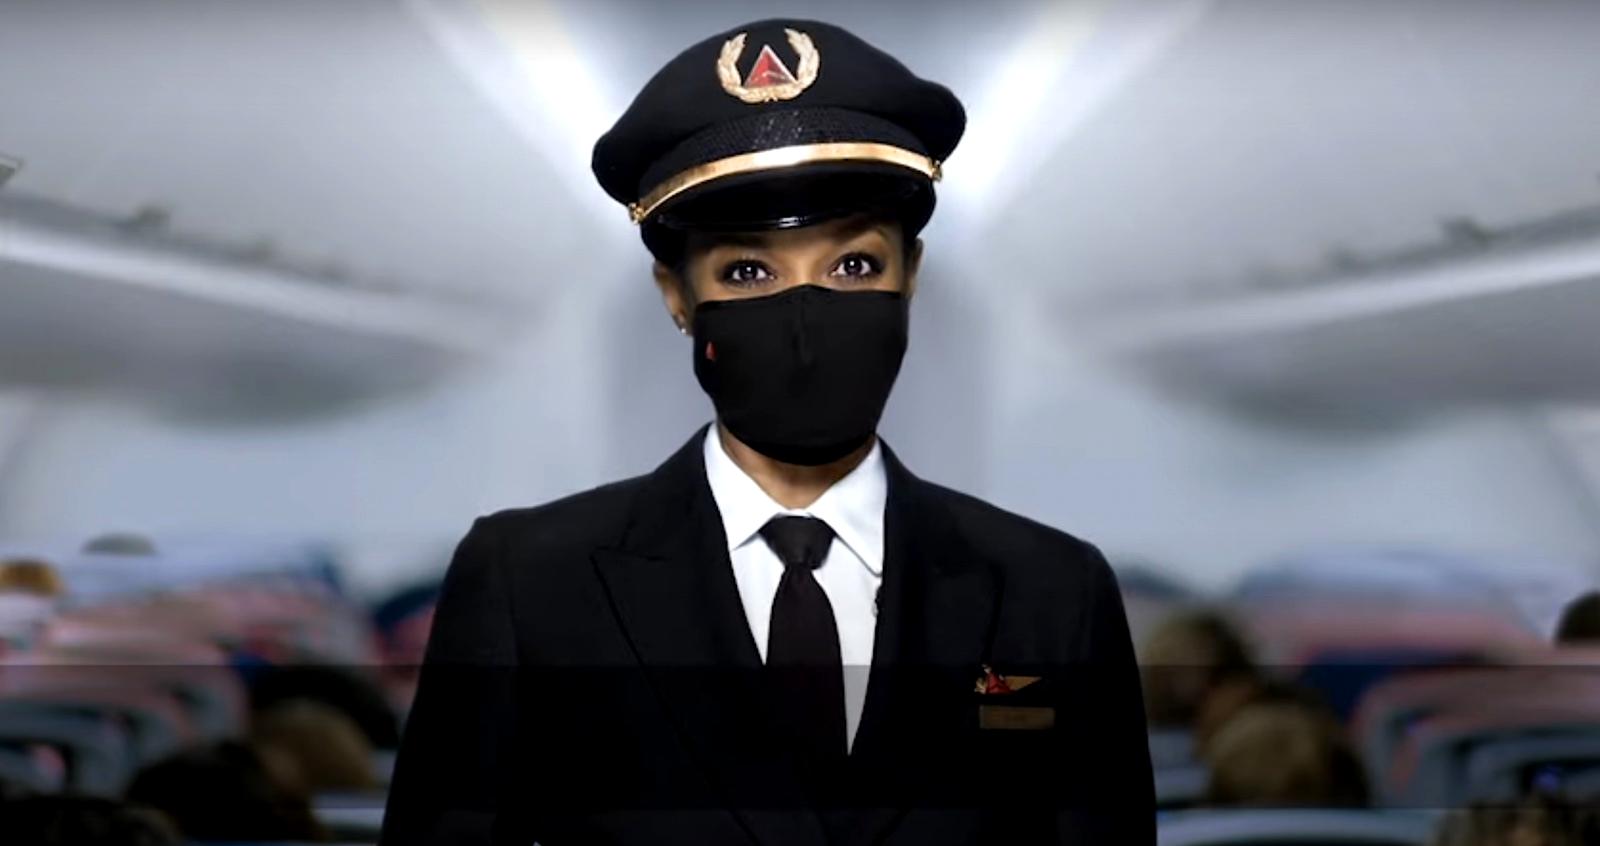 Delta Employees Mask Up In New Safety Video